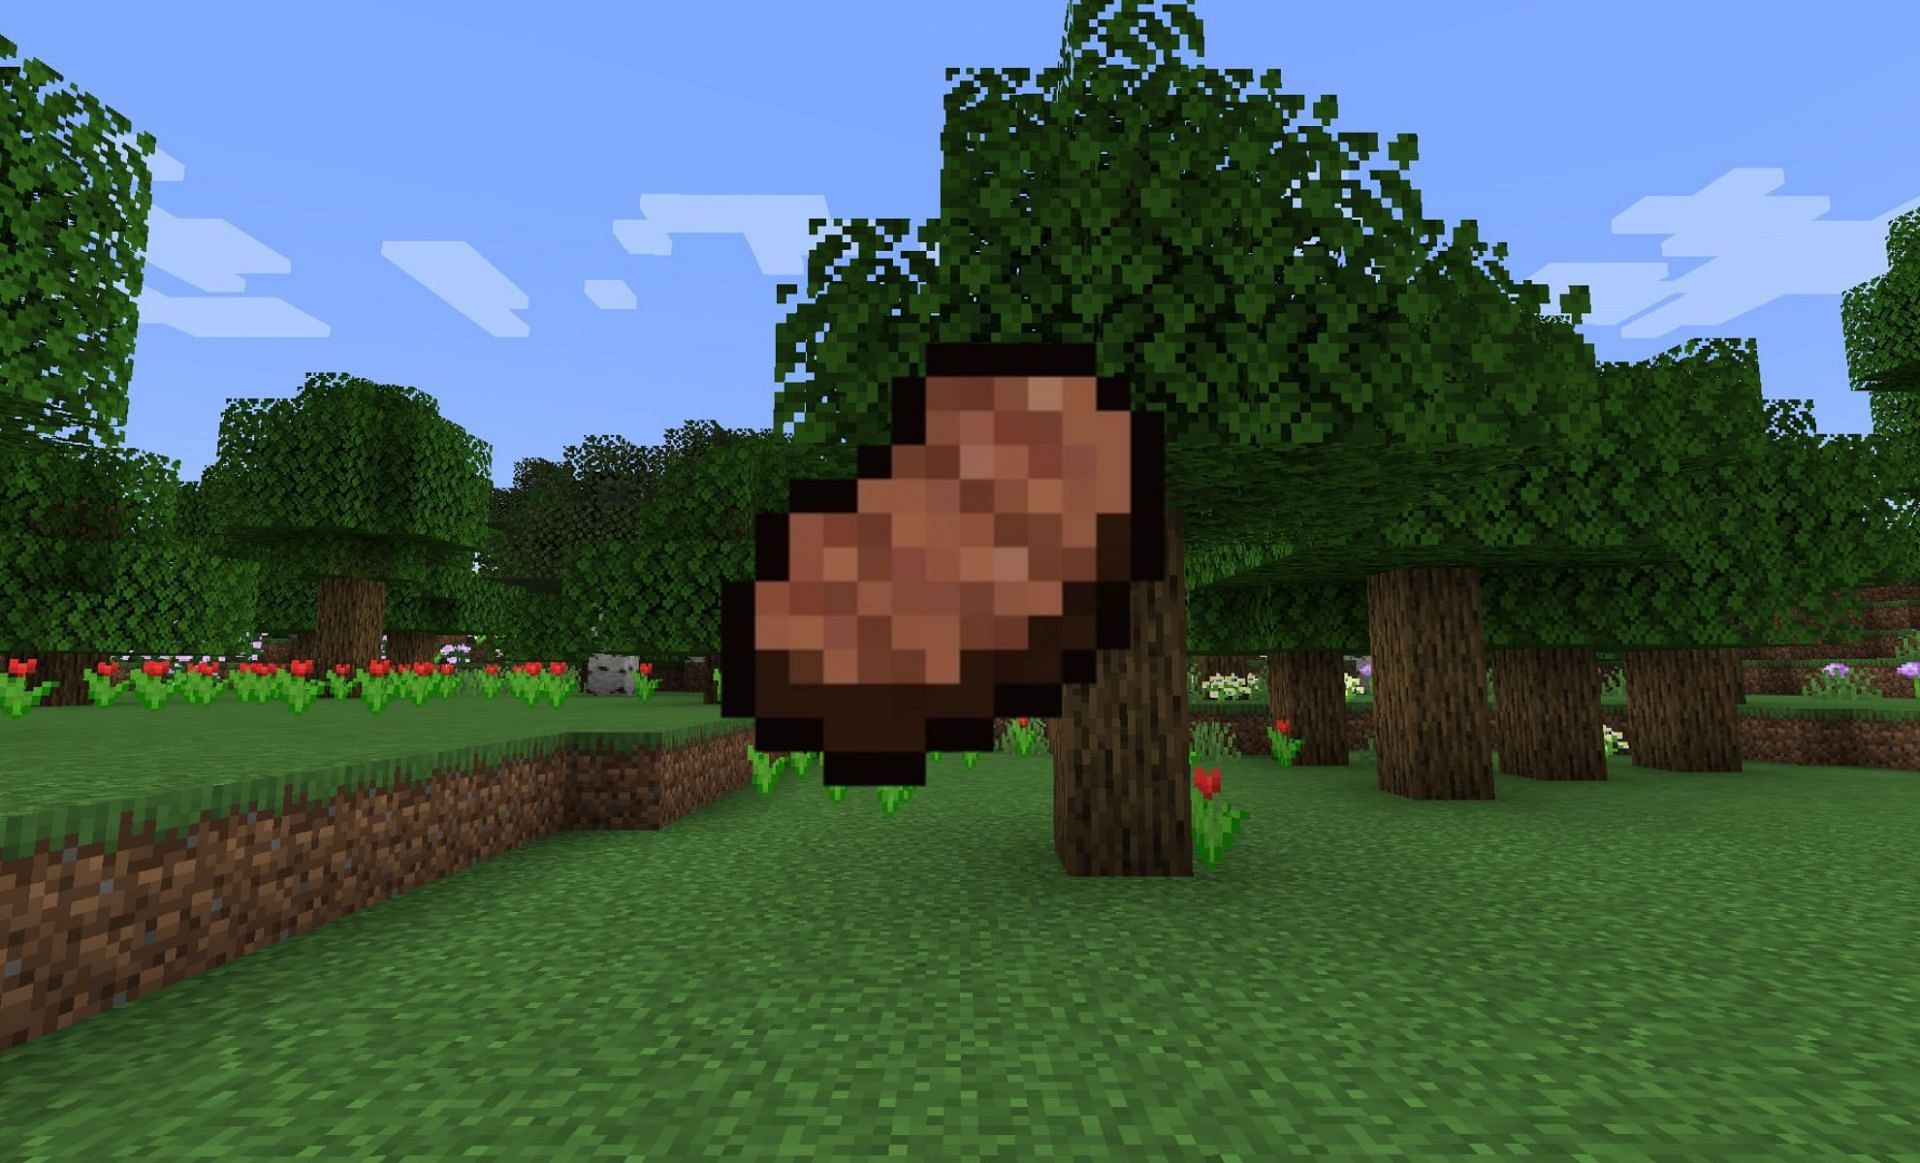 Steak is among the best foods (Image via Minecraft Wiki)